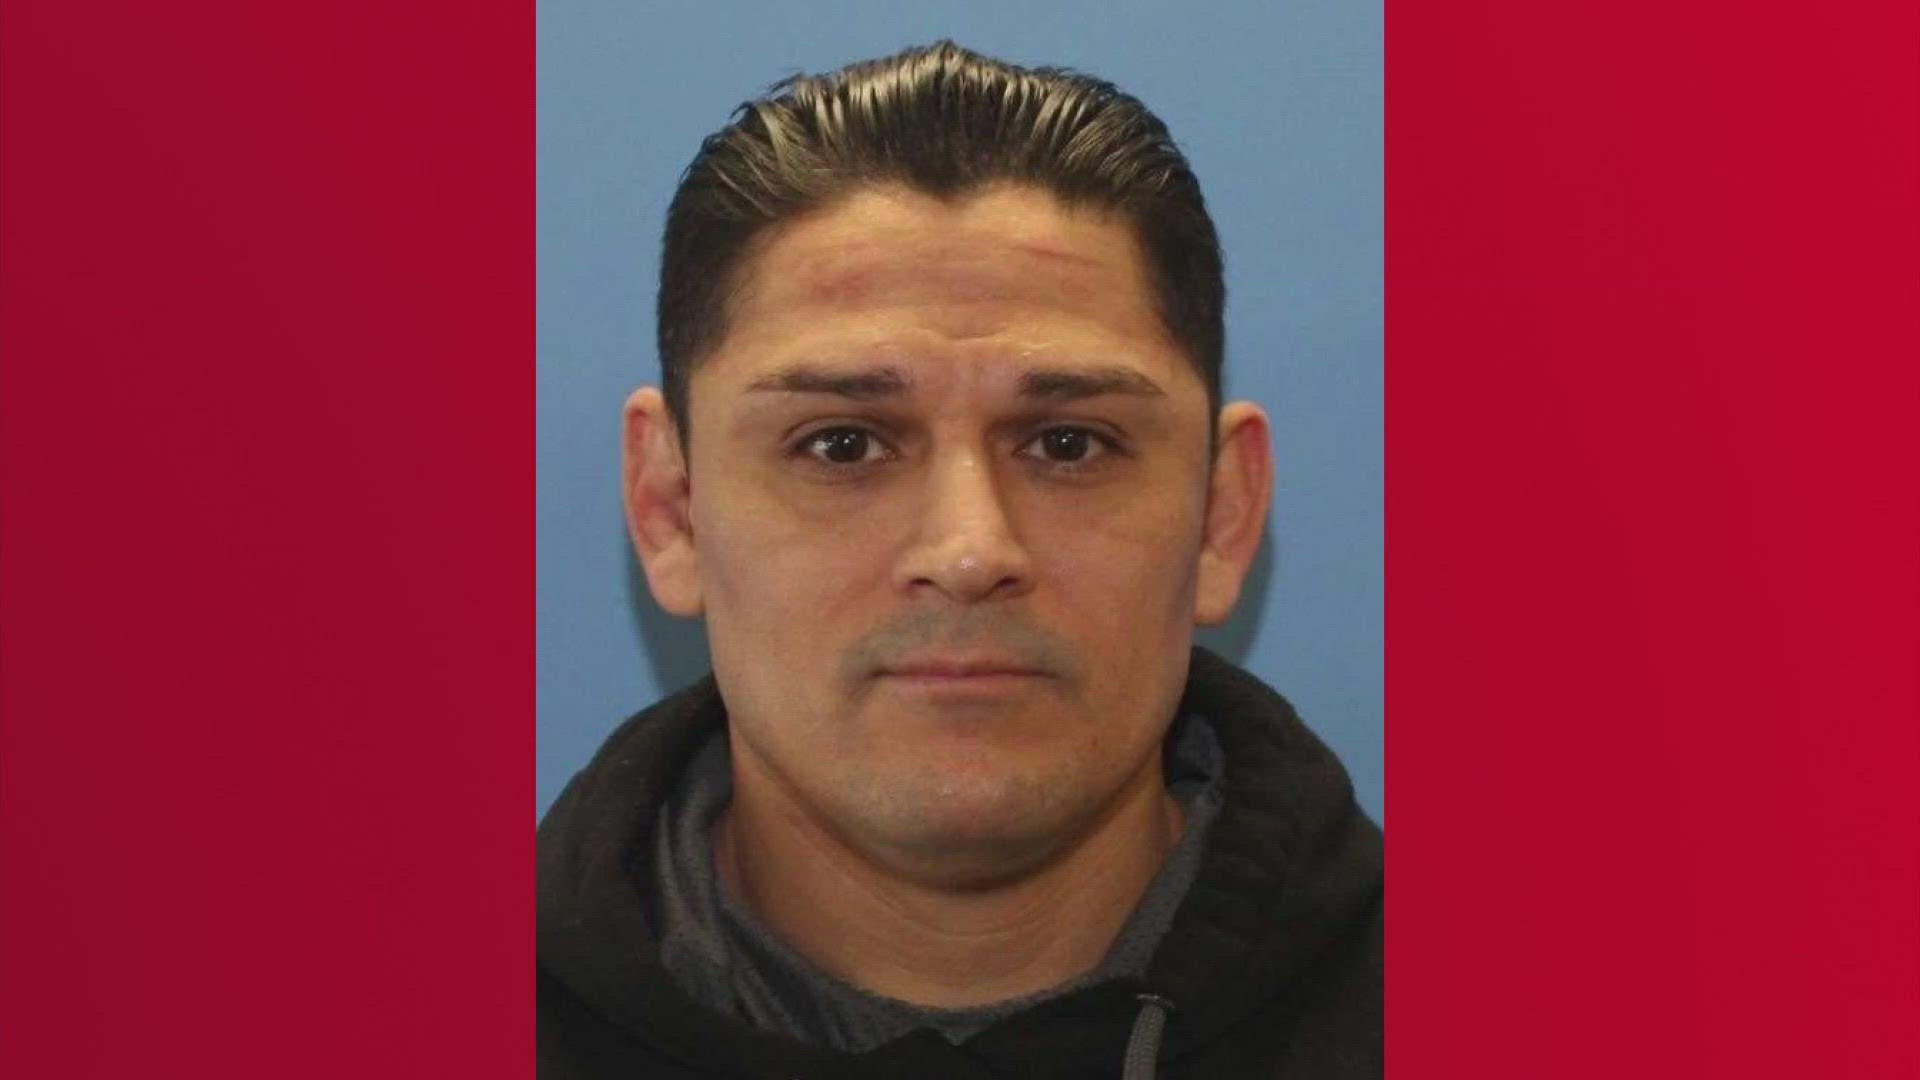 Police have identified the suspect as 39-year-old Elias Huizar. He is believed to have killed two people and abducted a 1-year-old child.